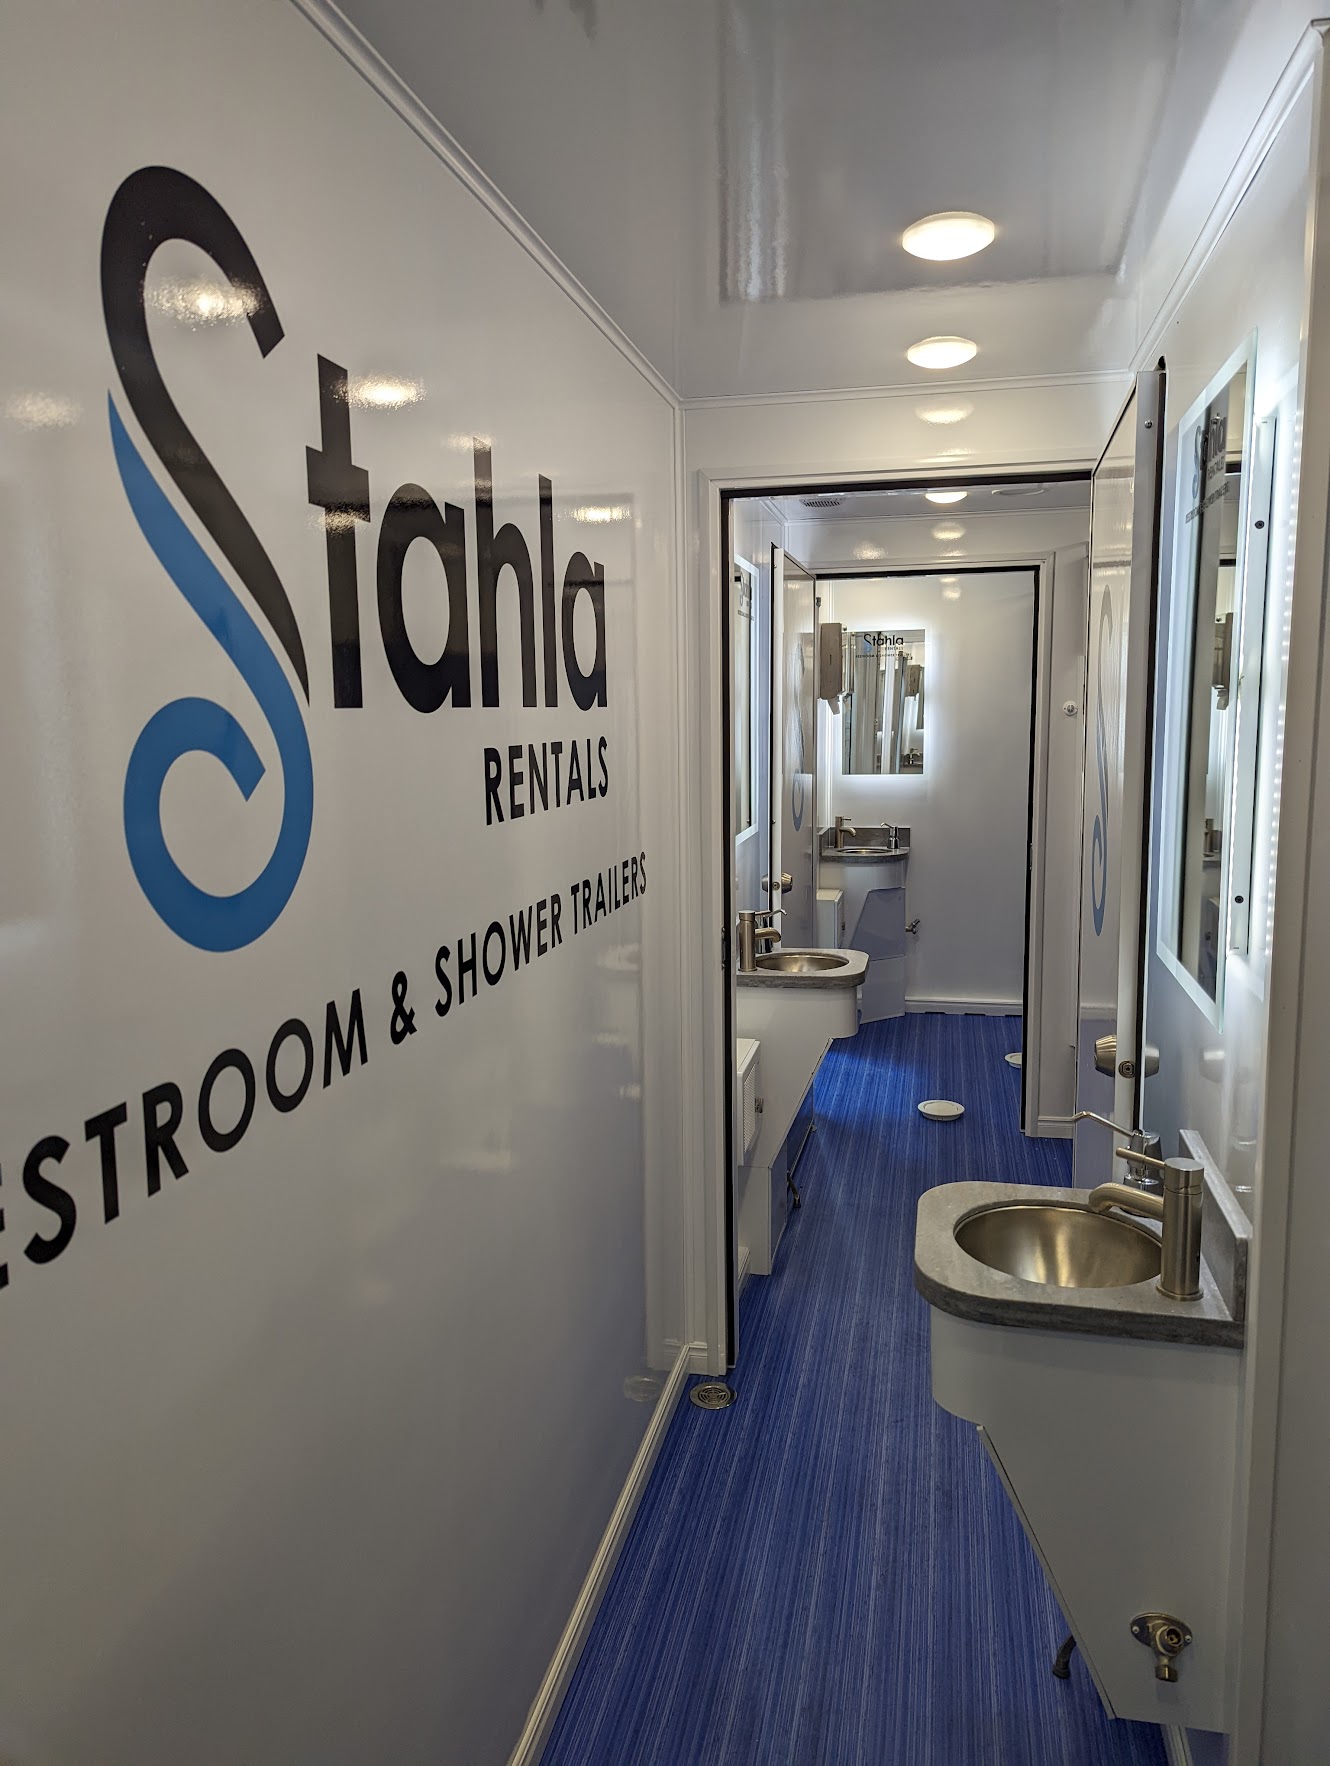 Shower and Restroom Trailer Rentals 1683218893 PXL 20220317 202540750 - Discover the Benefits of Renting an Enclosed Trailer with Shower and Toilet